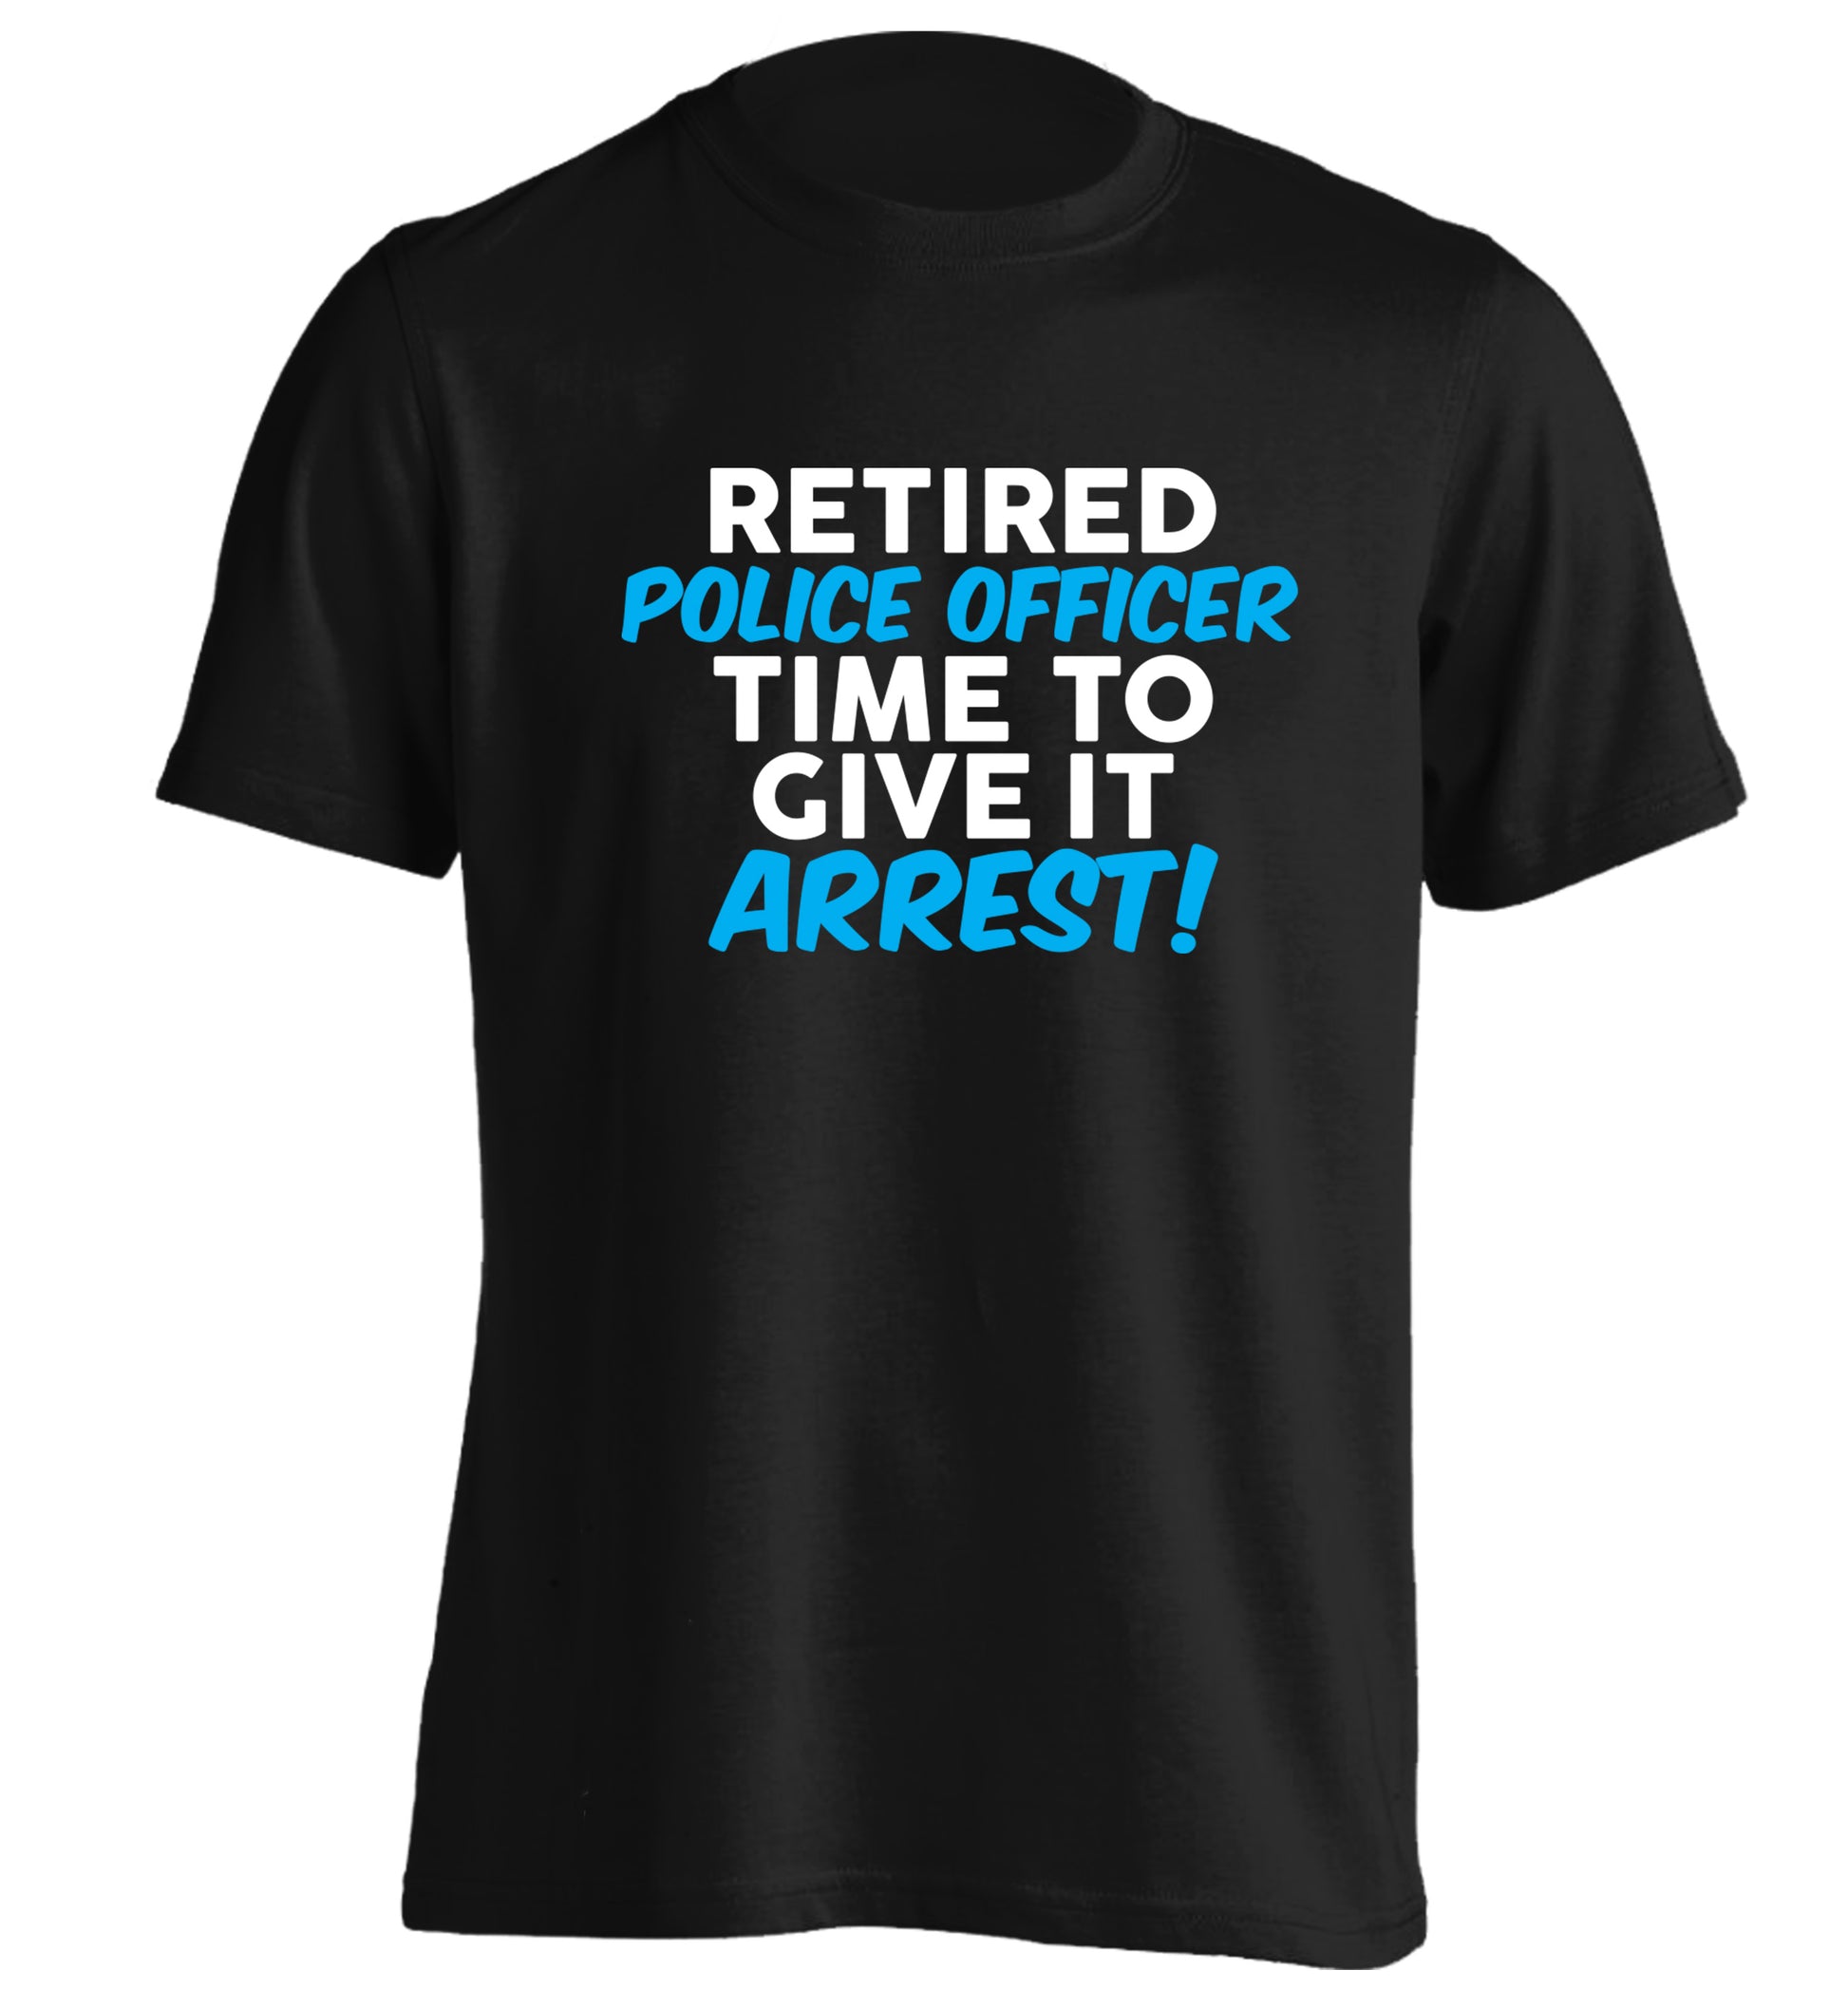 Retired police officer time to give it arrest adults unisex black Tshirt 2XL